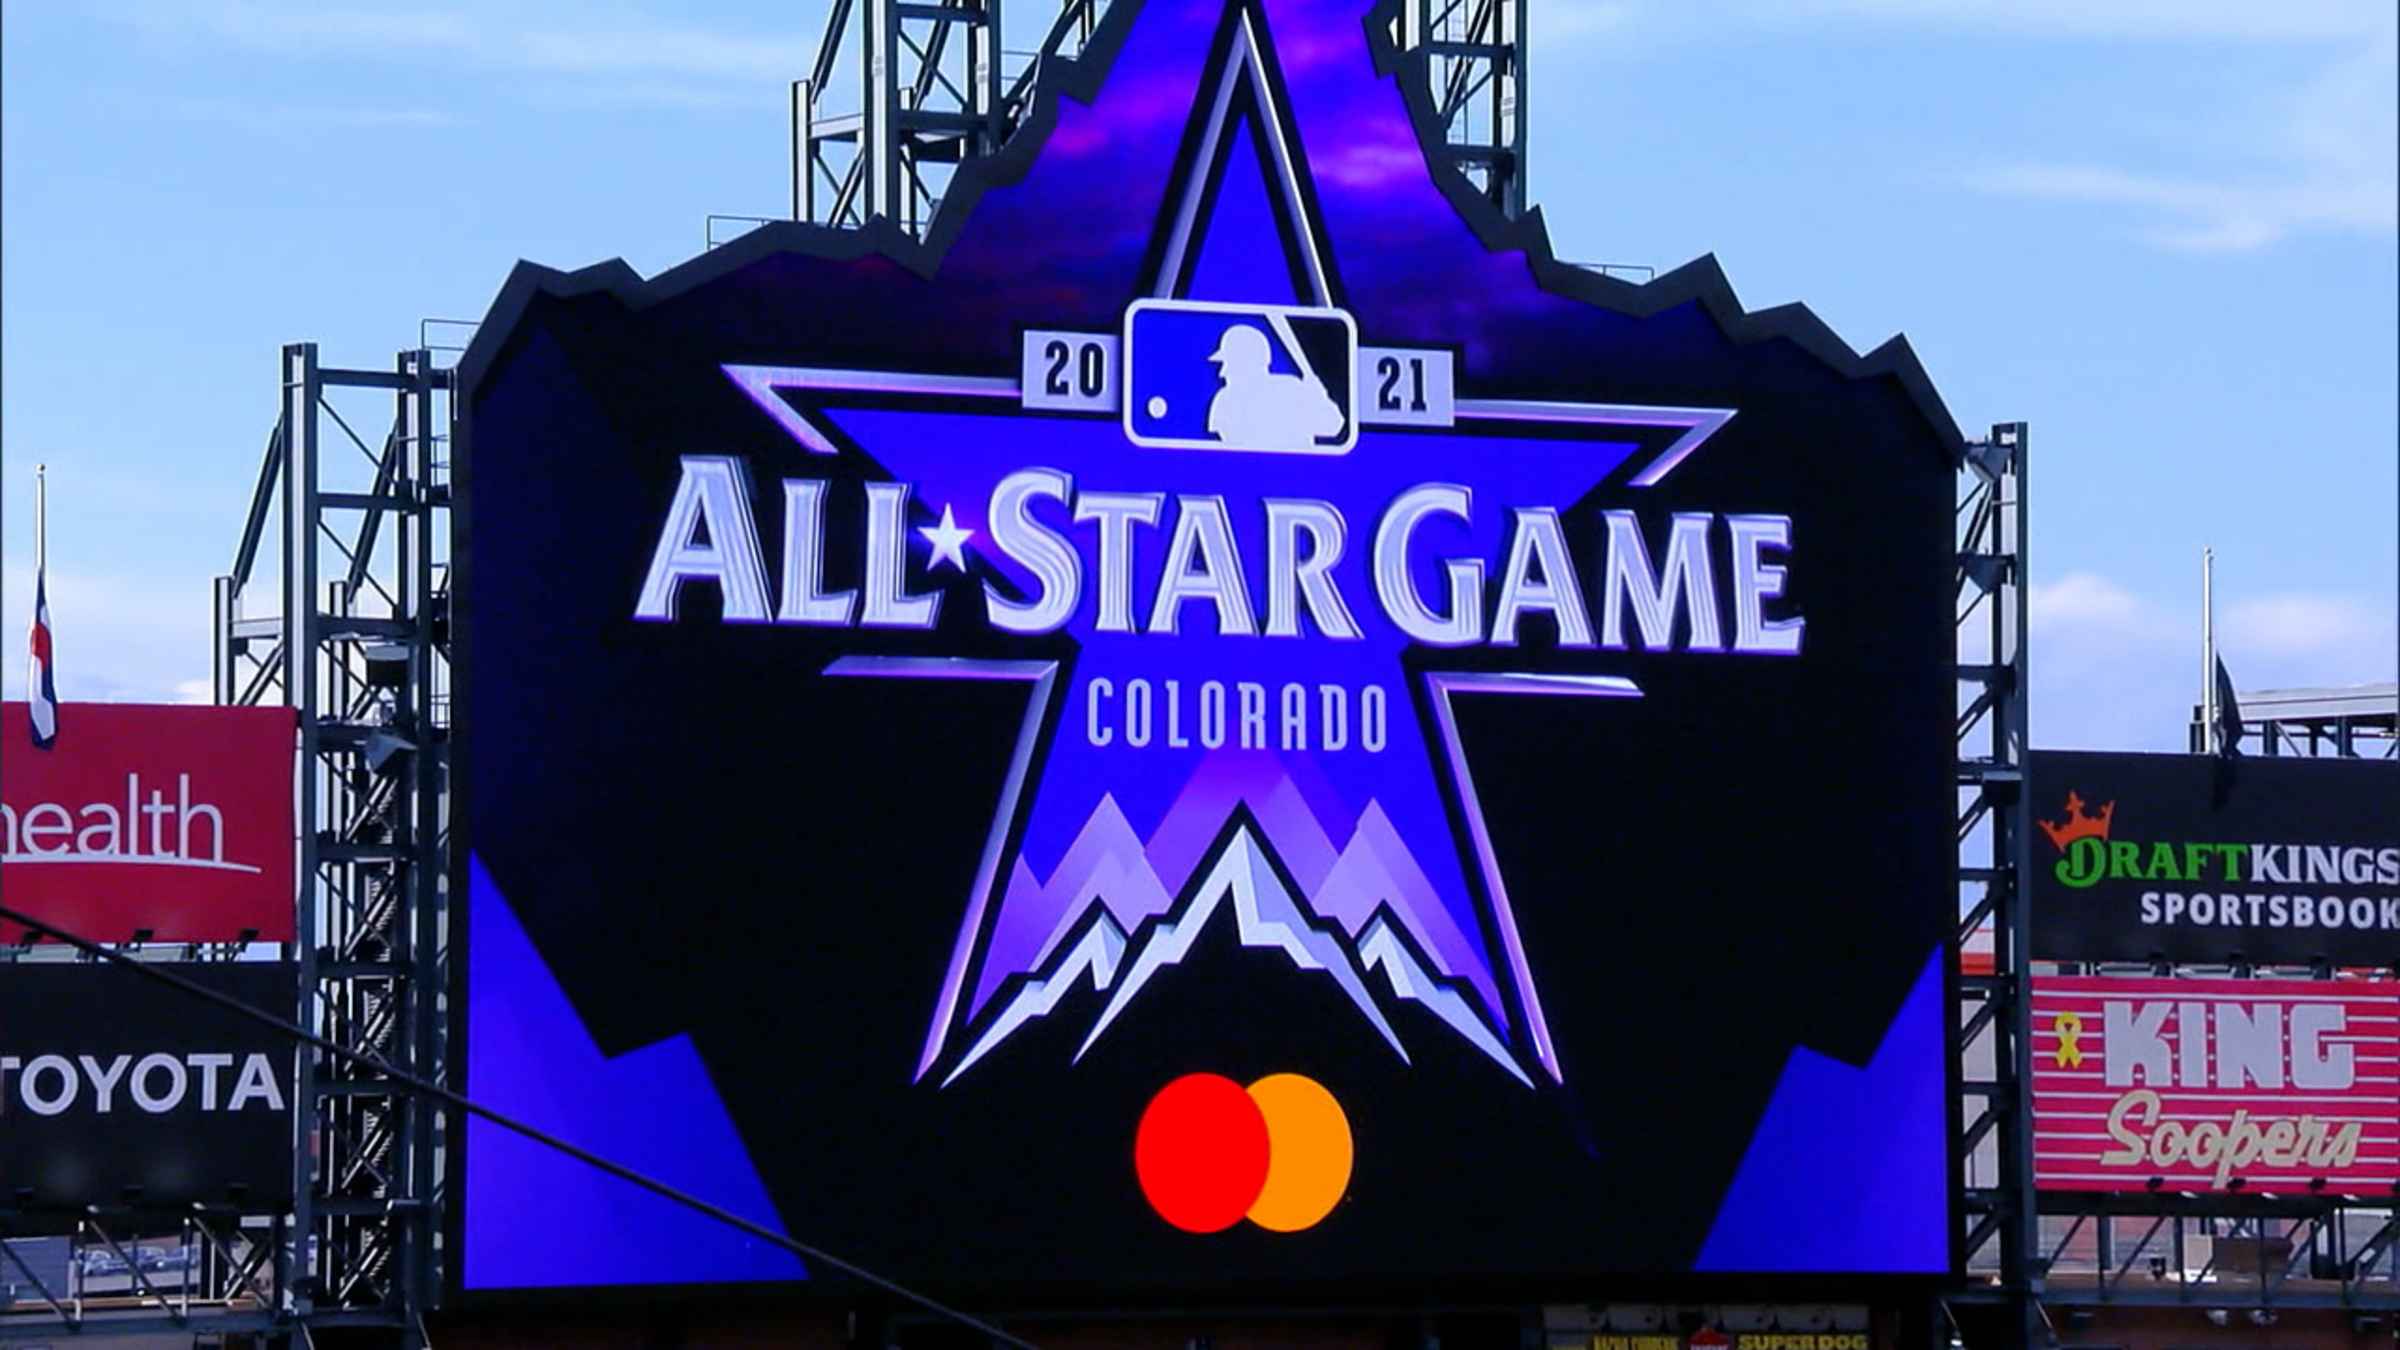 Official 2021 All-Star Game logo presented by MLB